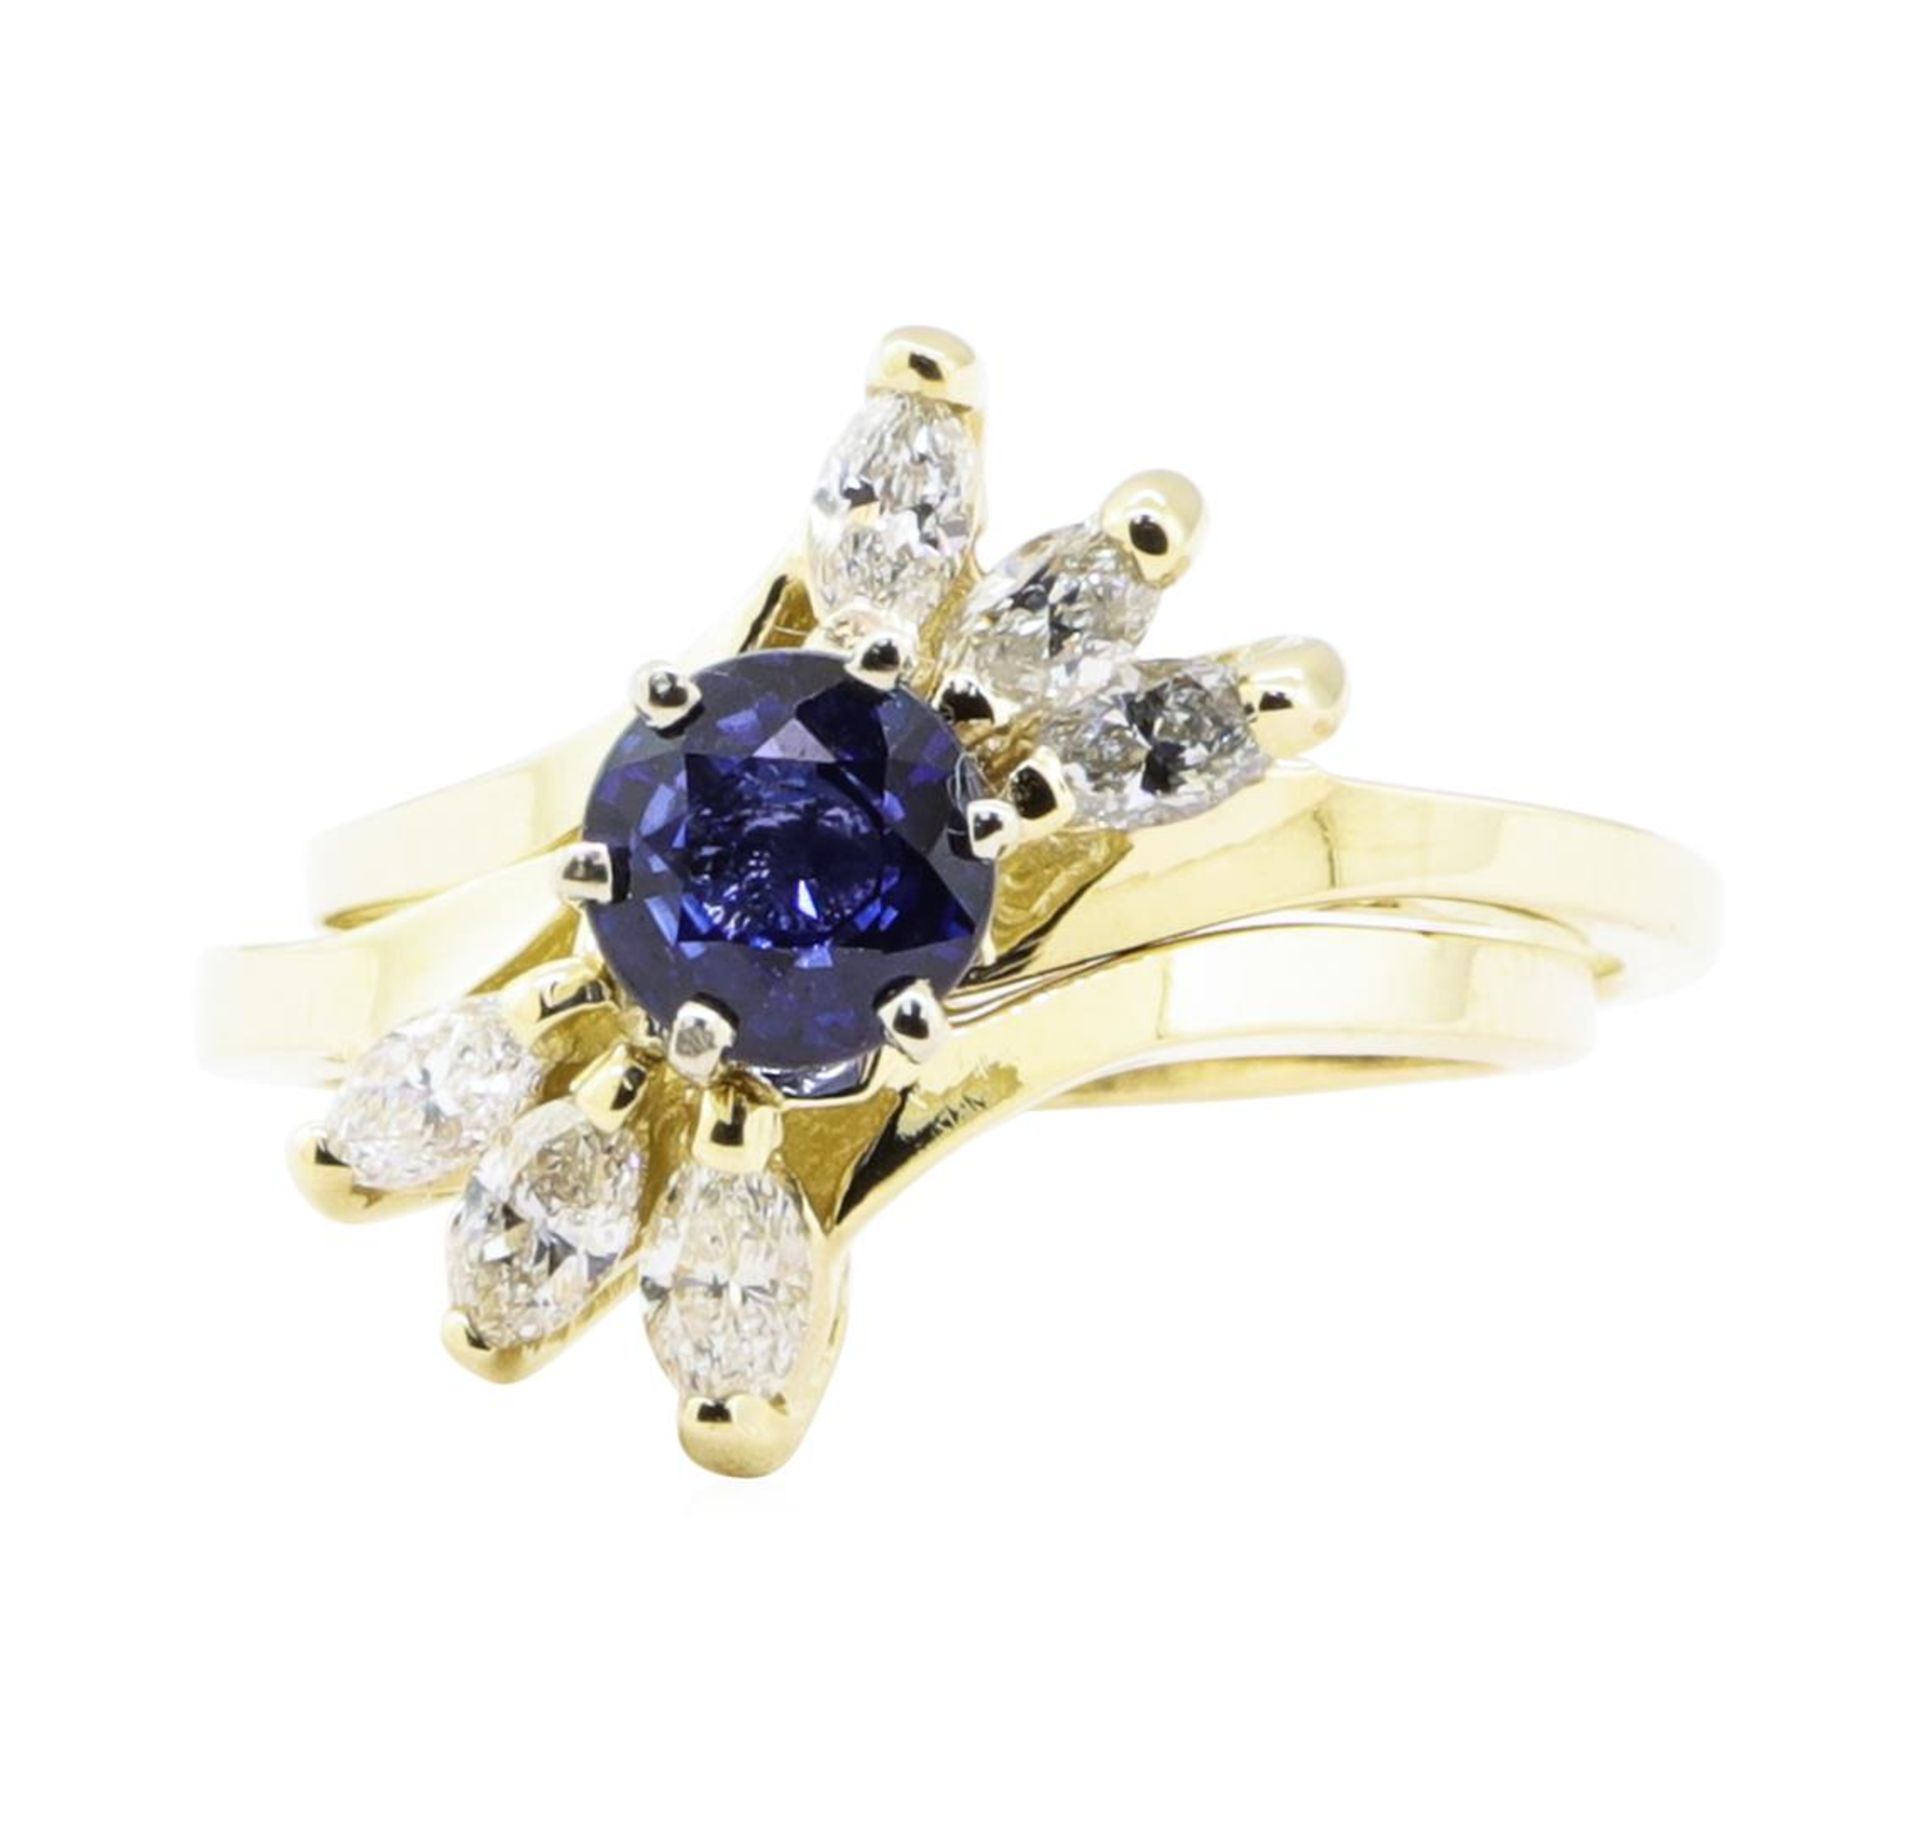 1.21 ctw Sapphire And Diamond Ring And Band - 14KT Yellow Gold - Image 2 of 4